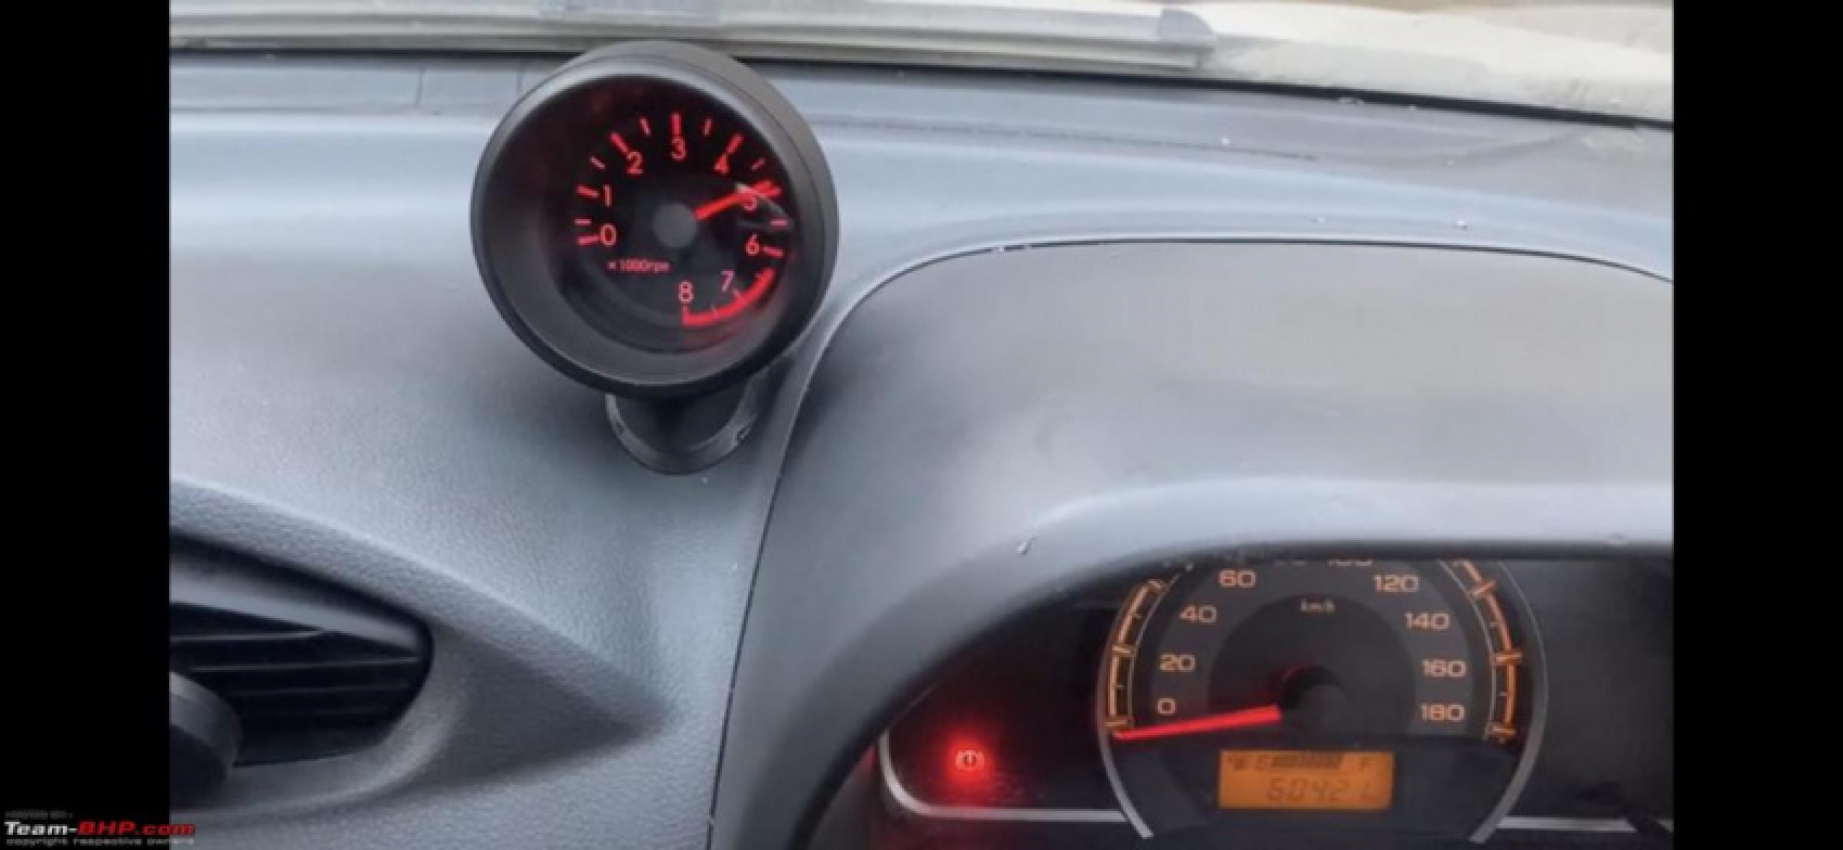 autos, cars, chevrolet spark, general motors, indian, member content, spare parts, speedometer, tachometerm instrument cluster, advice: adding a tachometer to a base variant's instrument cluster